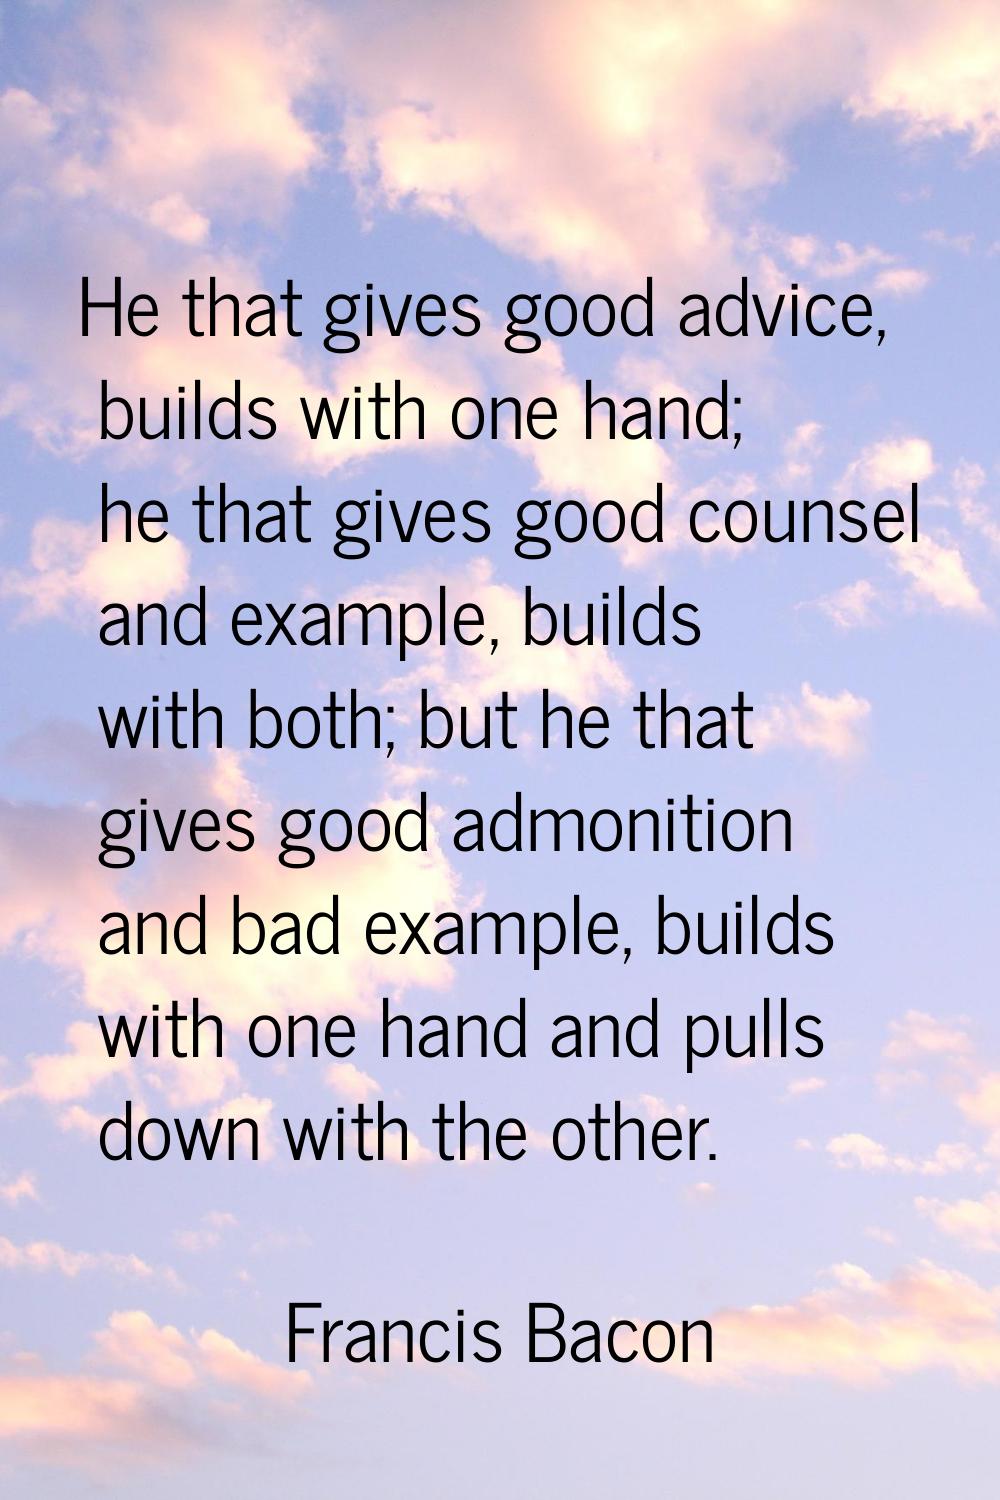 He that gives good advice, builds with one hand; he that gives good counsel and example, builds wit